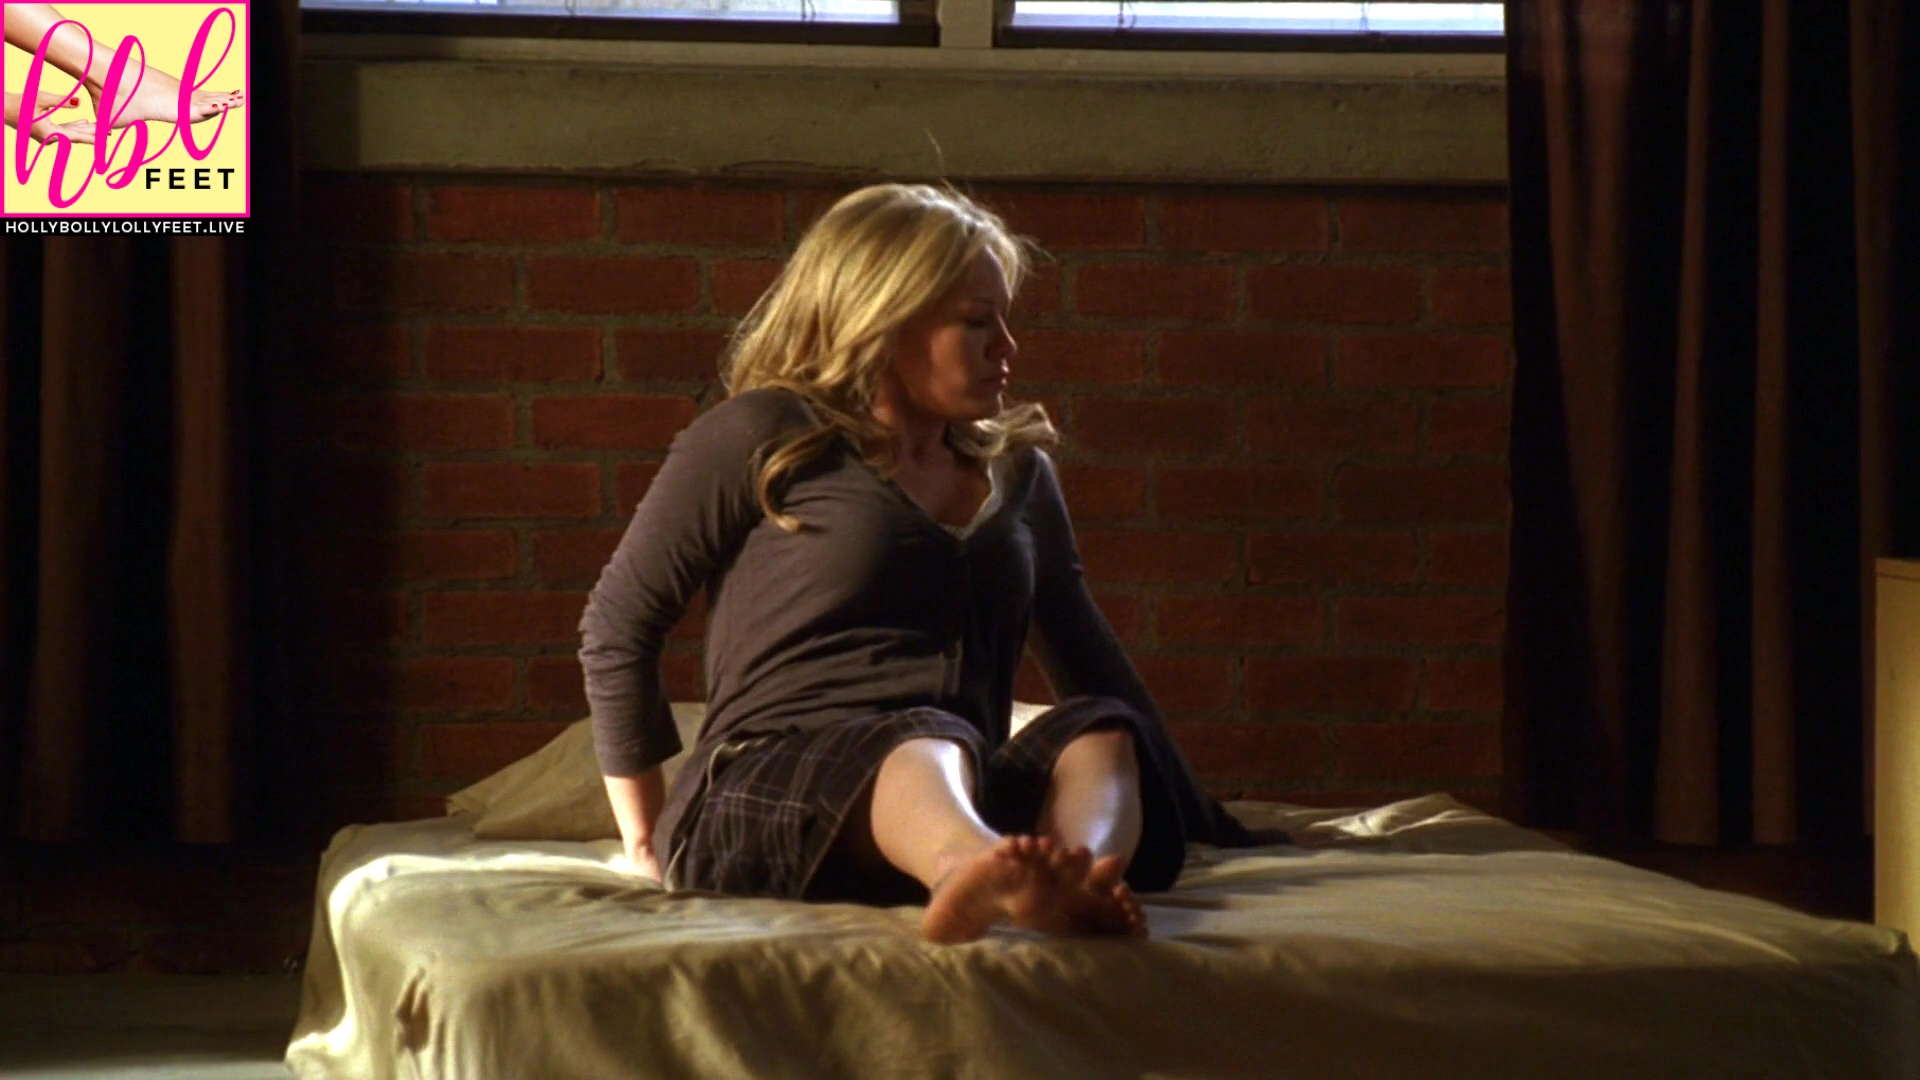 Hilary Duff Feet Soles Nice from American TV series "Ghost Whisper...